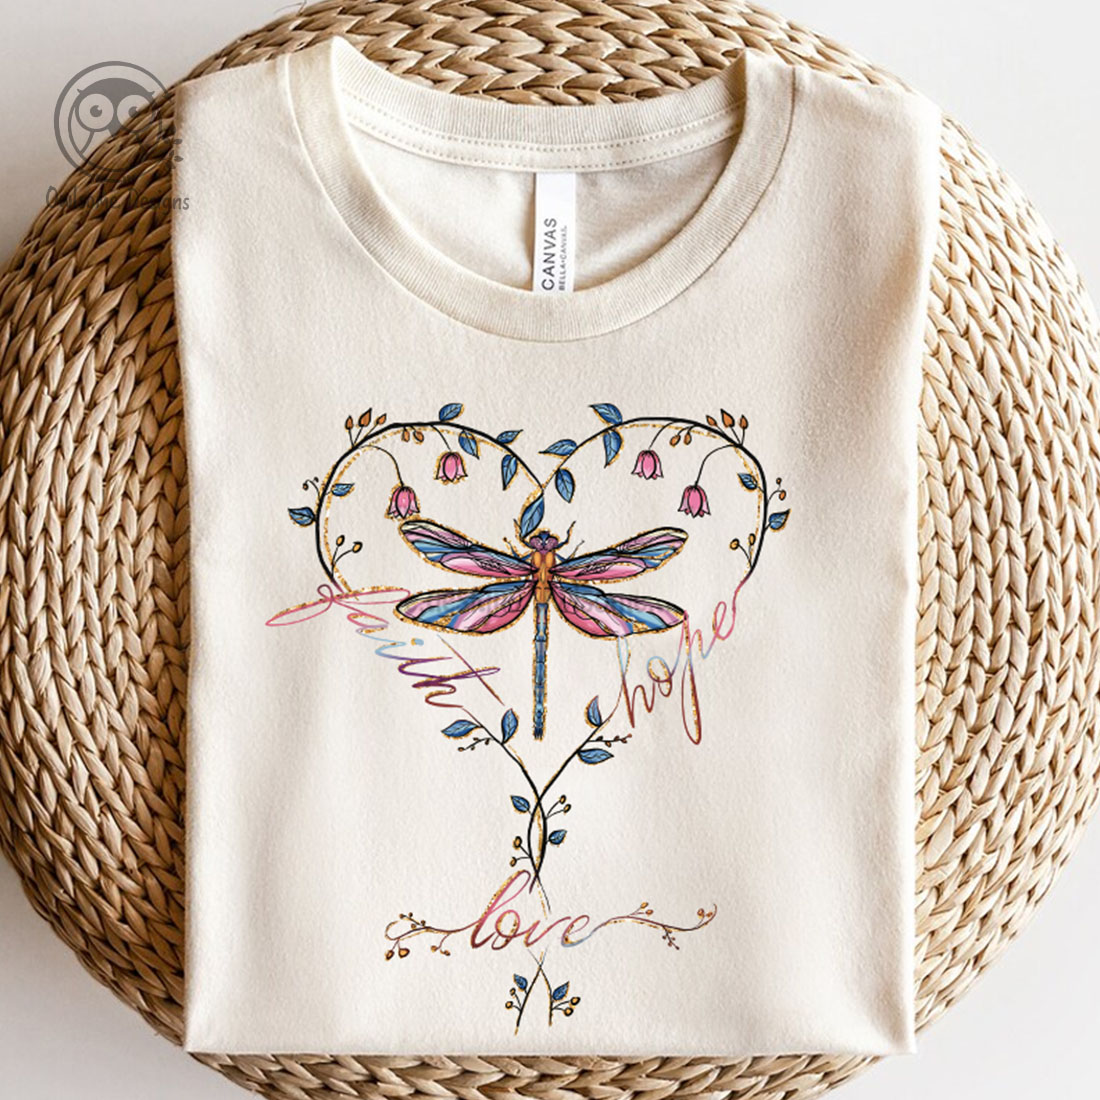 Image of a t-shirt with wonderful dragonfly print and lettering.